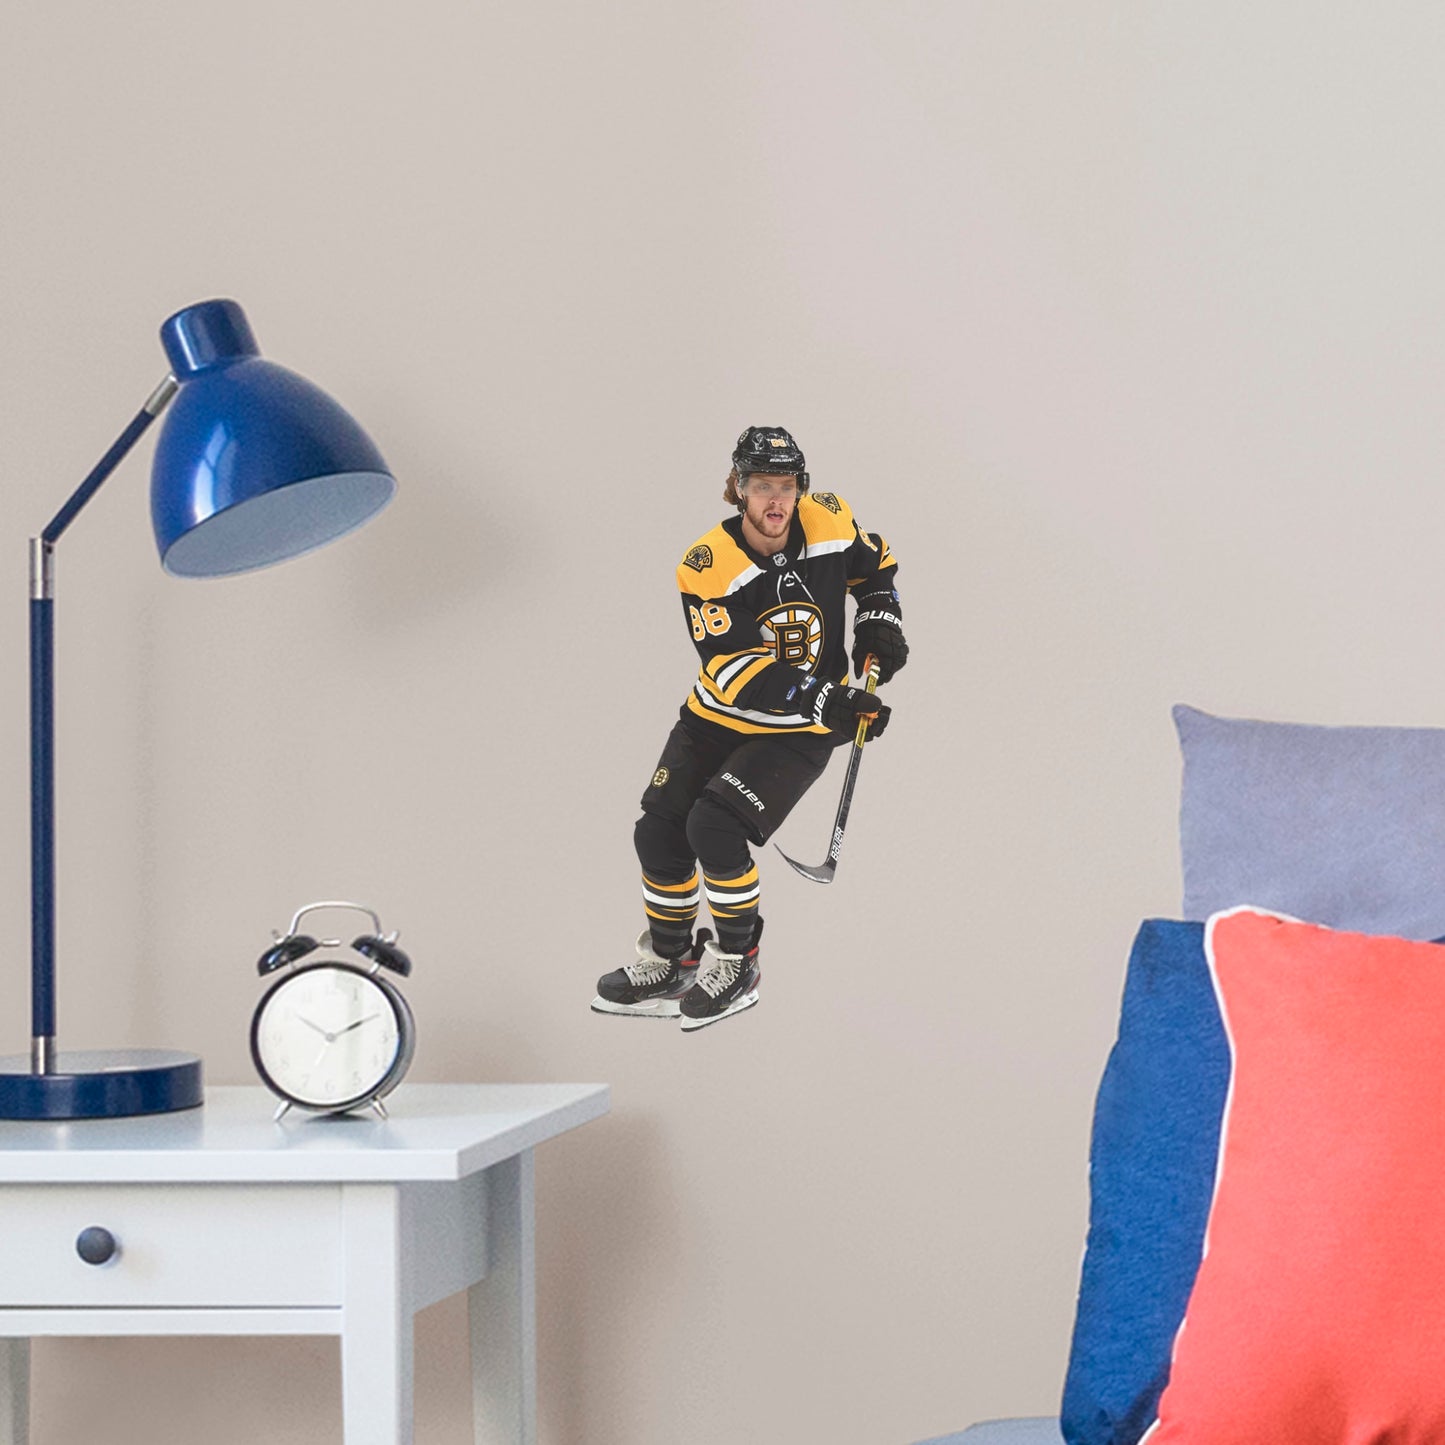 Large Athlete + 2 Decals (9"W x 16"H) He was the B's first-round pick in the 2014 NHL draft, and "Pasta" has since become one of the League's most prolific scorers. Bring the action into the game room, living room or locker room with this officially licensed NHL wall decal featuring Boston Bruins player David Pastrnak poised to skate into action.